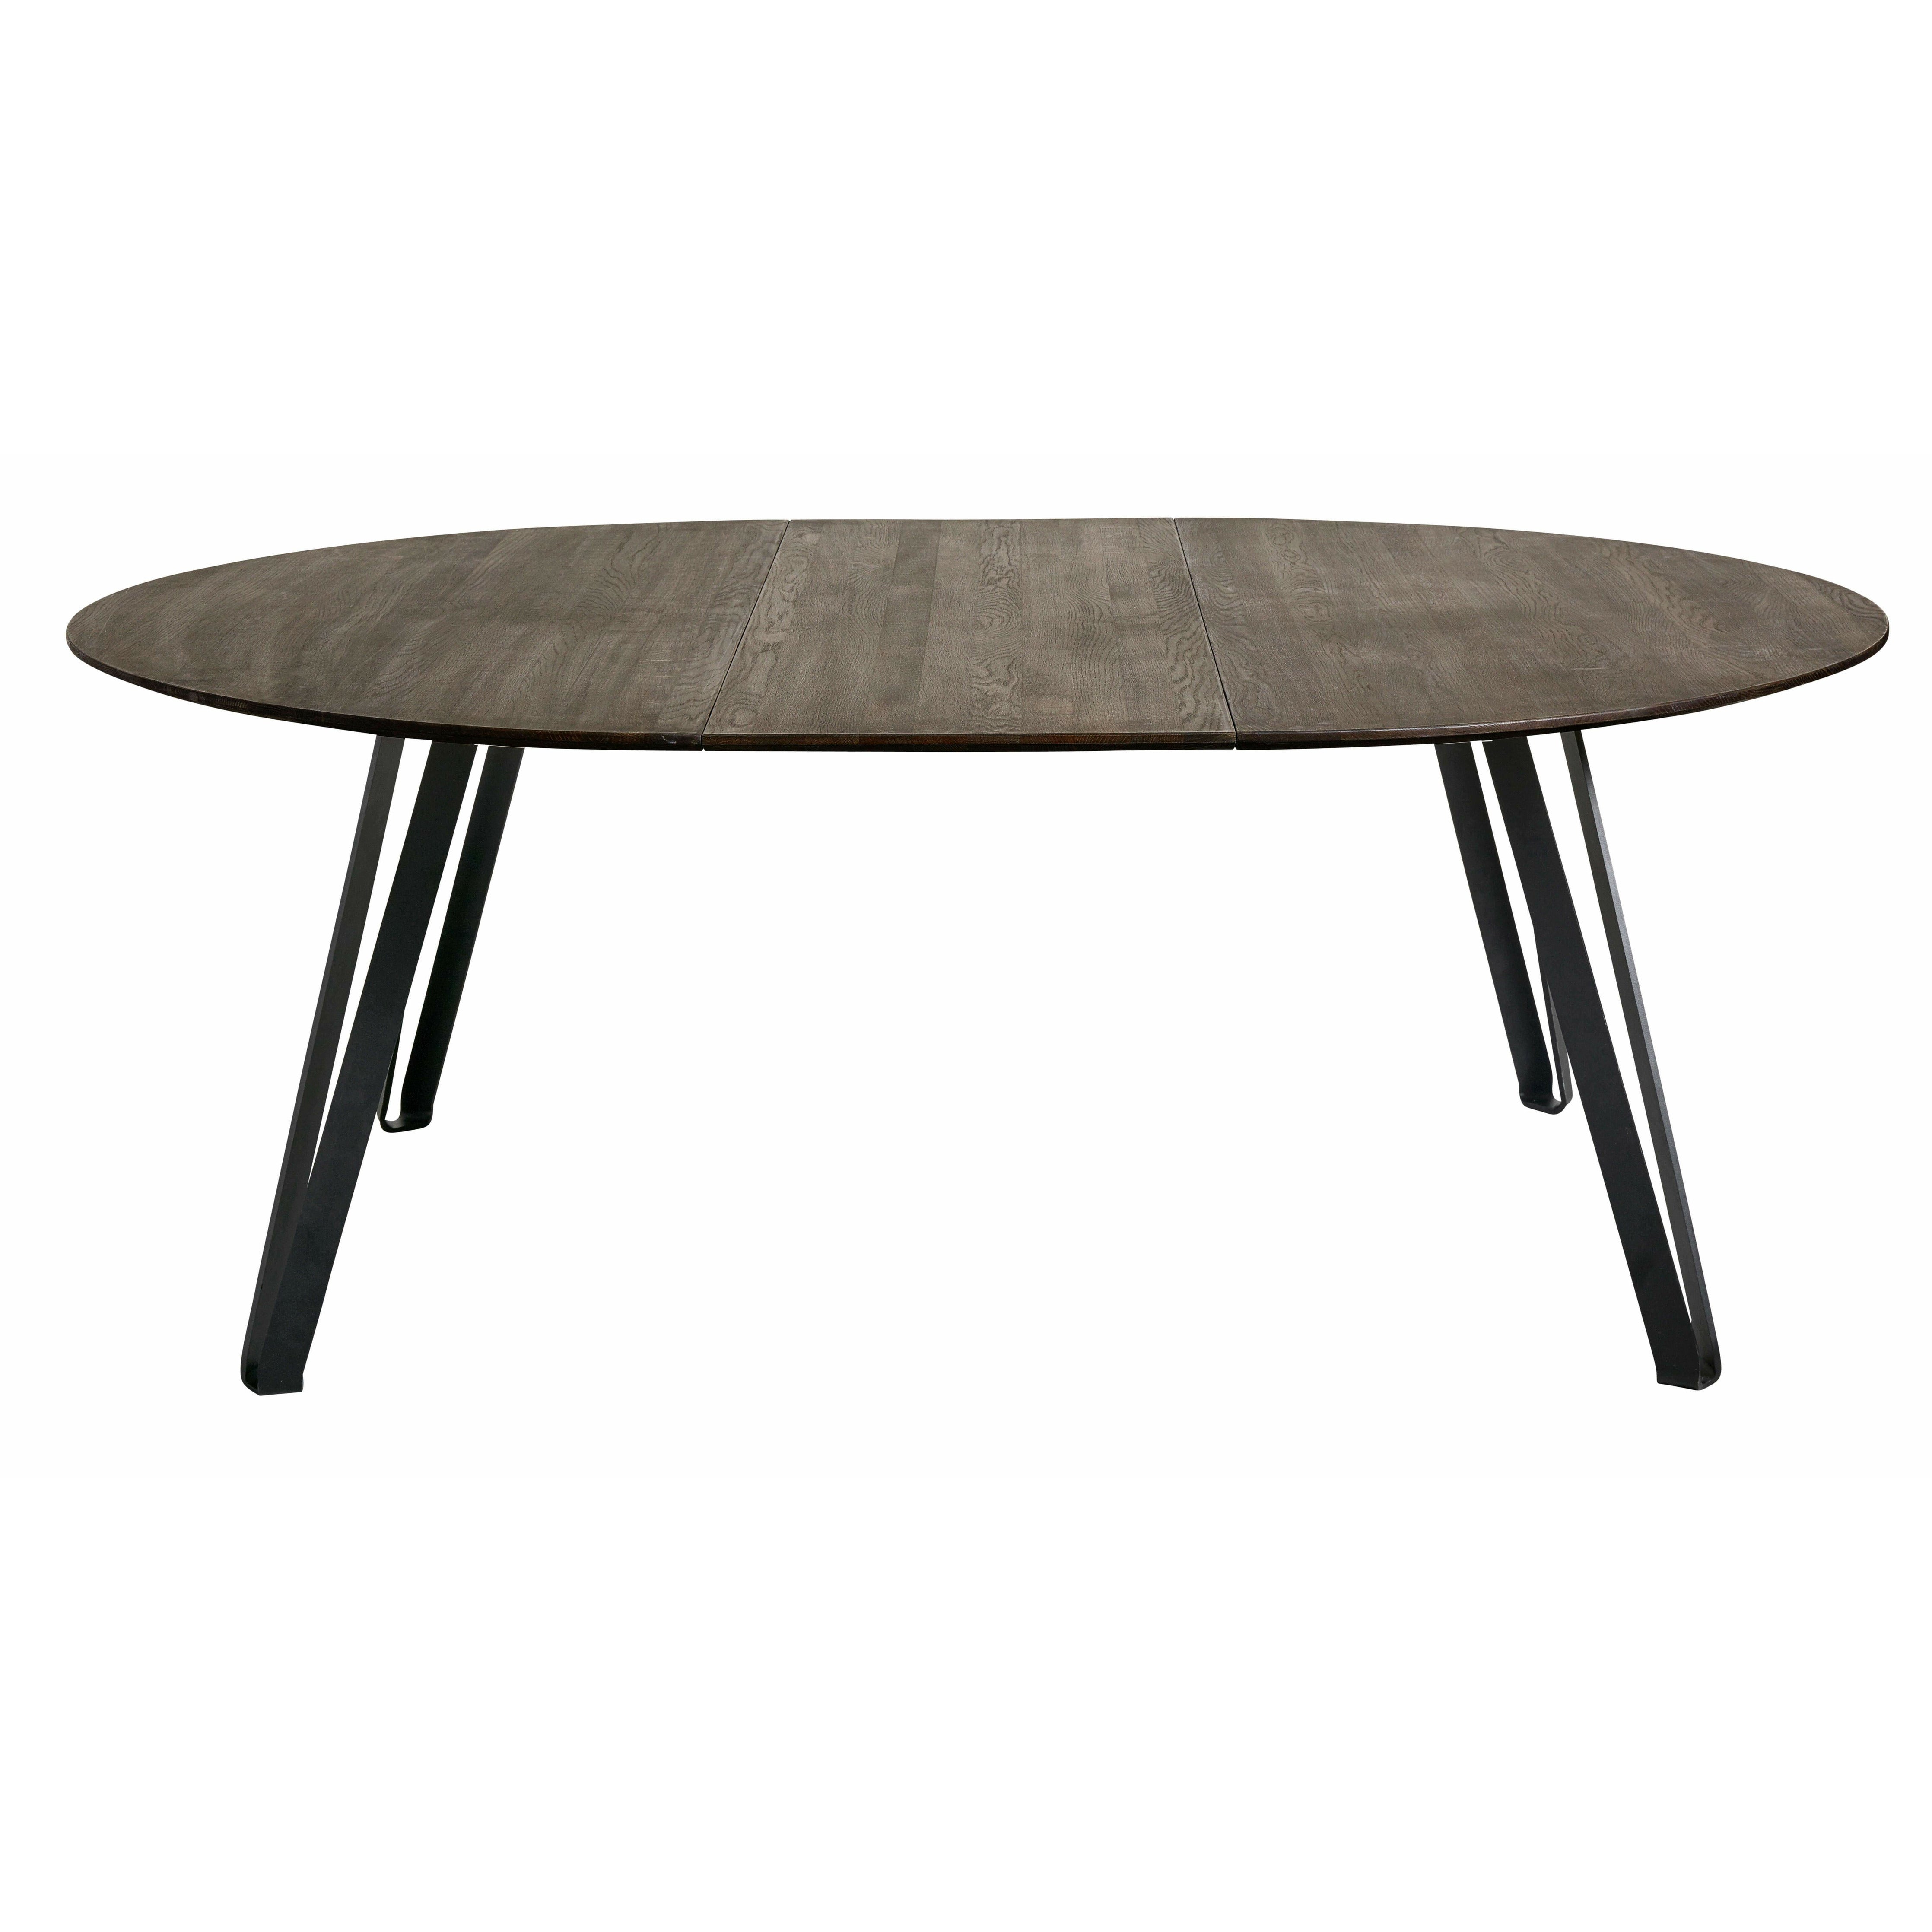 MUUBS Space Eetting Table Round Smoked Oak, 150 cm